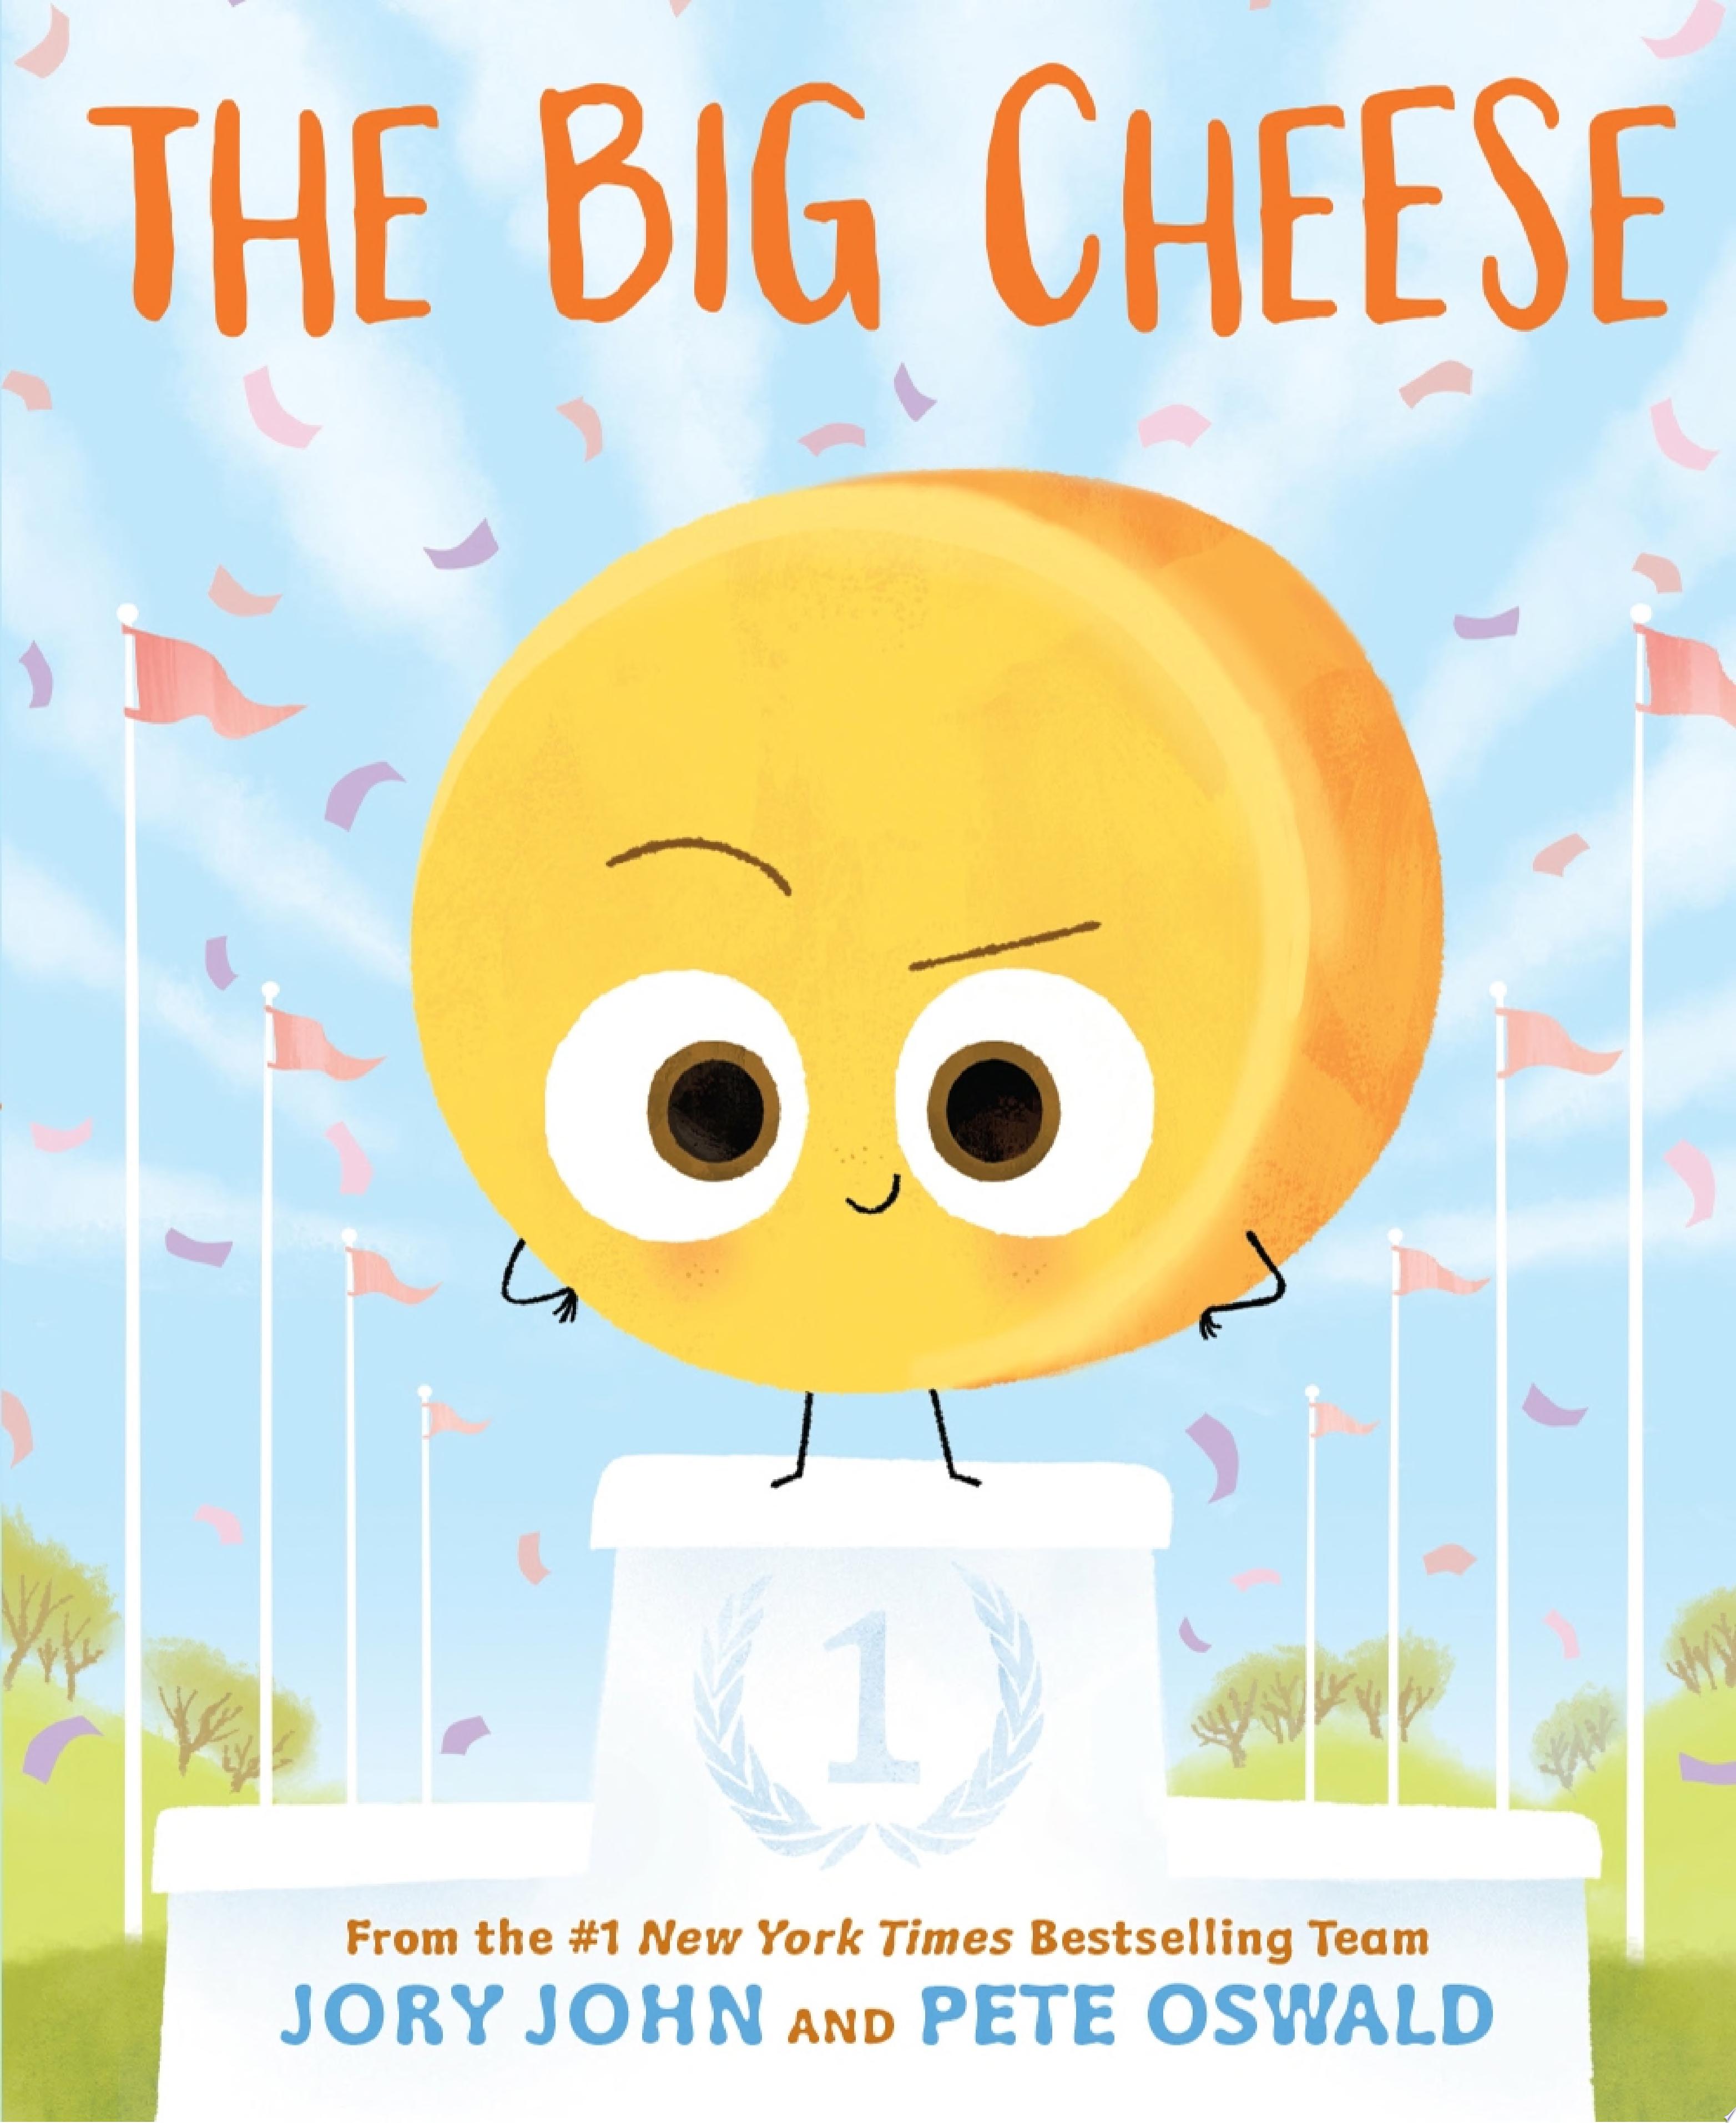 Image for "The Big Cheese"